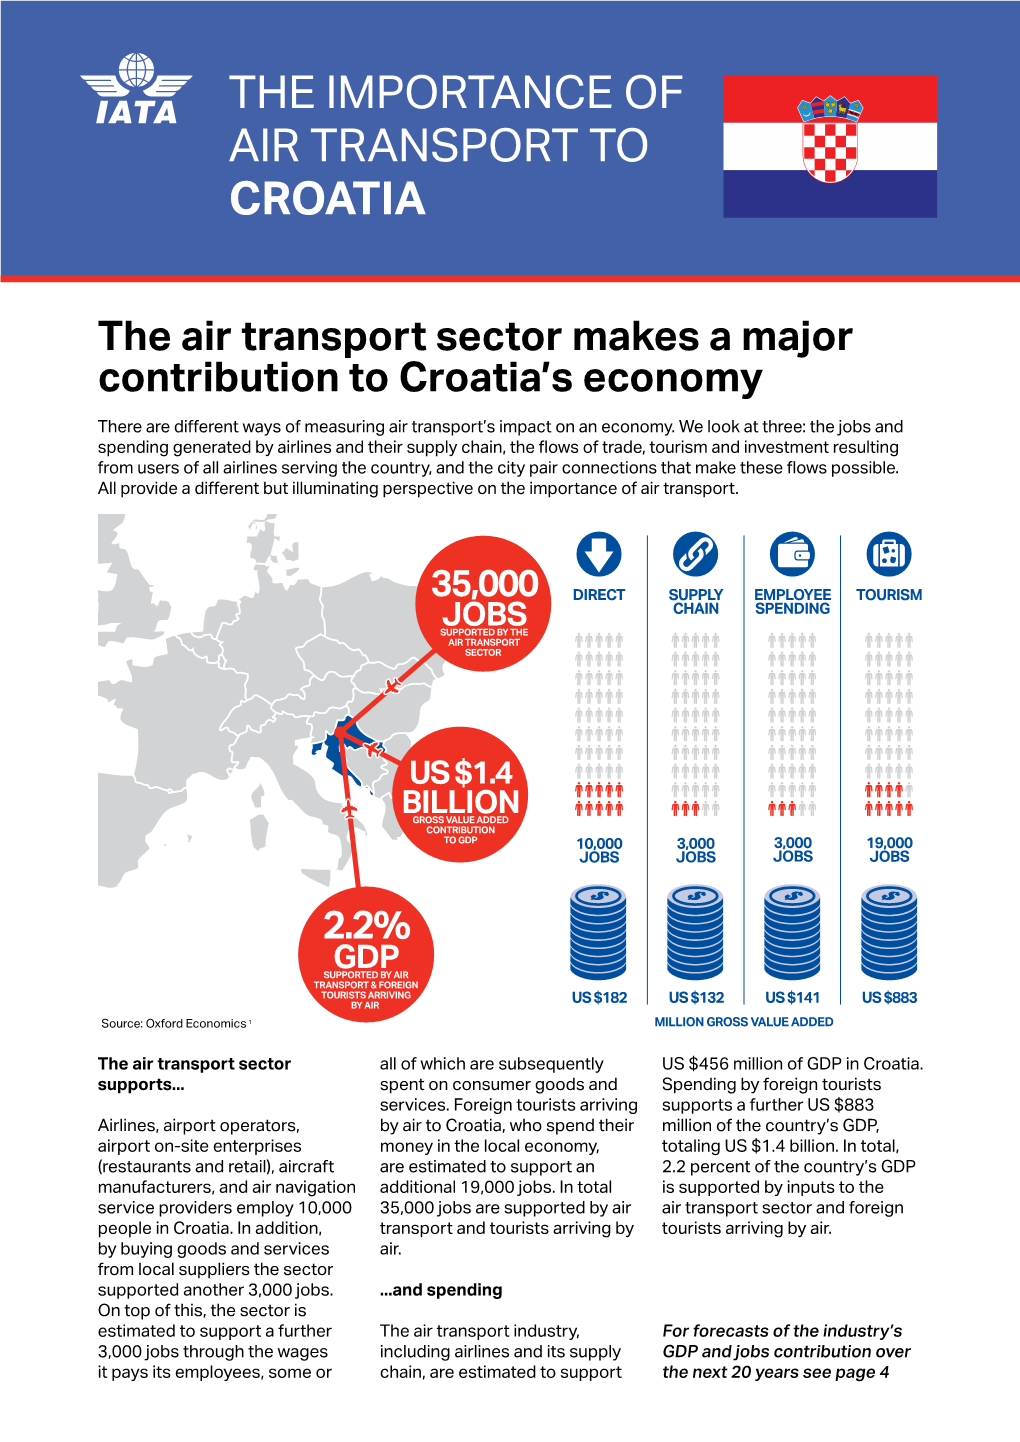 The Importance of Air Transport to Croatia